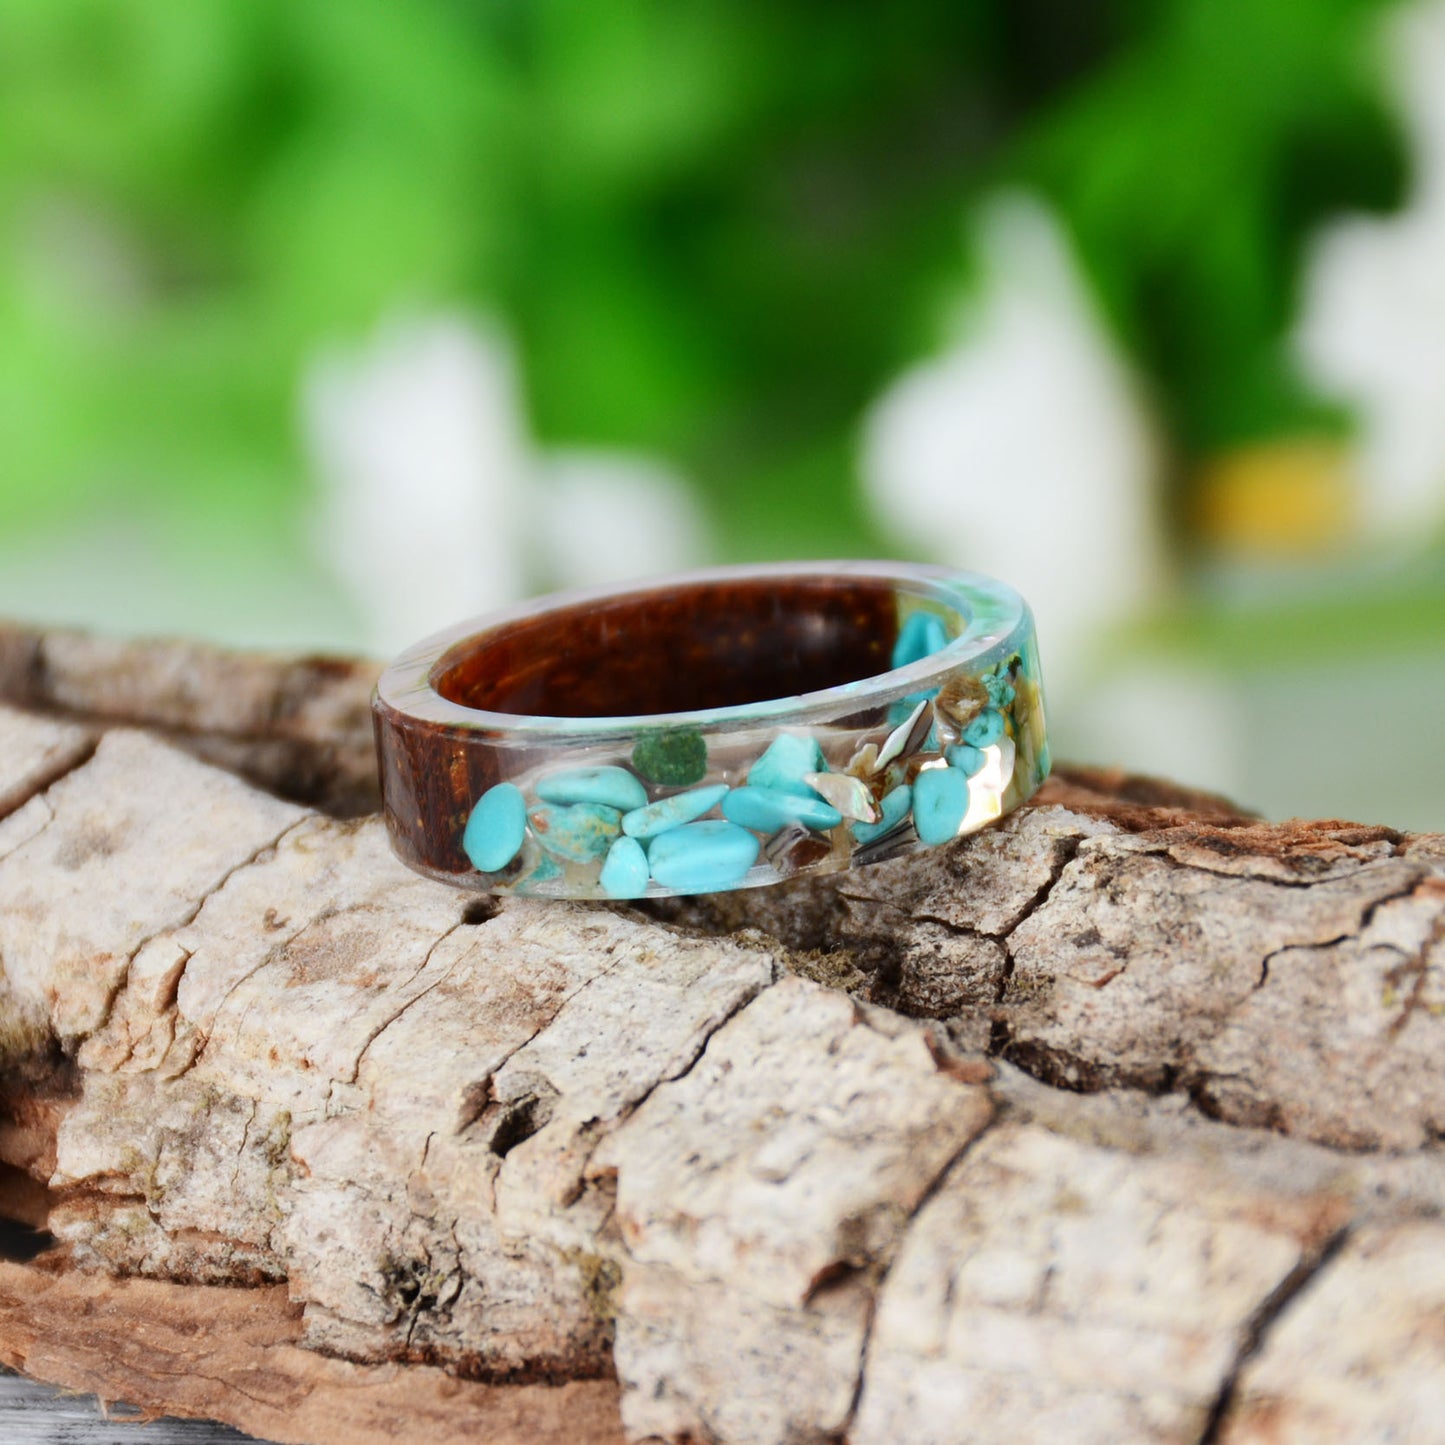 Handmade DIY romantic dry flower Real wood resin ring gifts for the lover